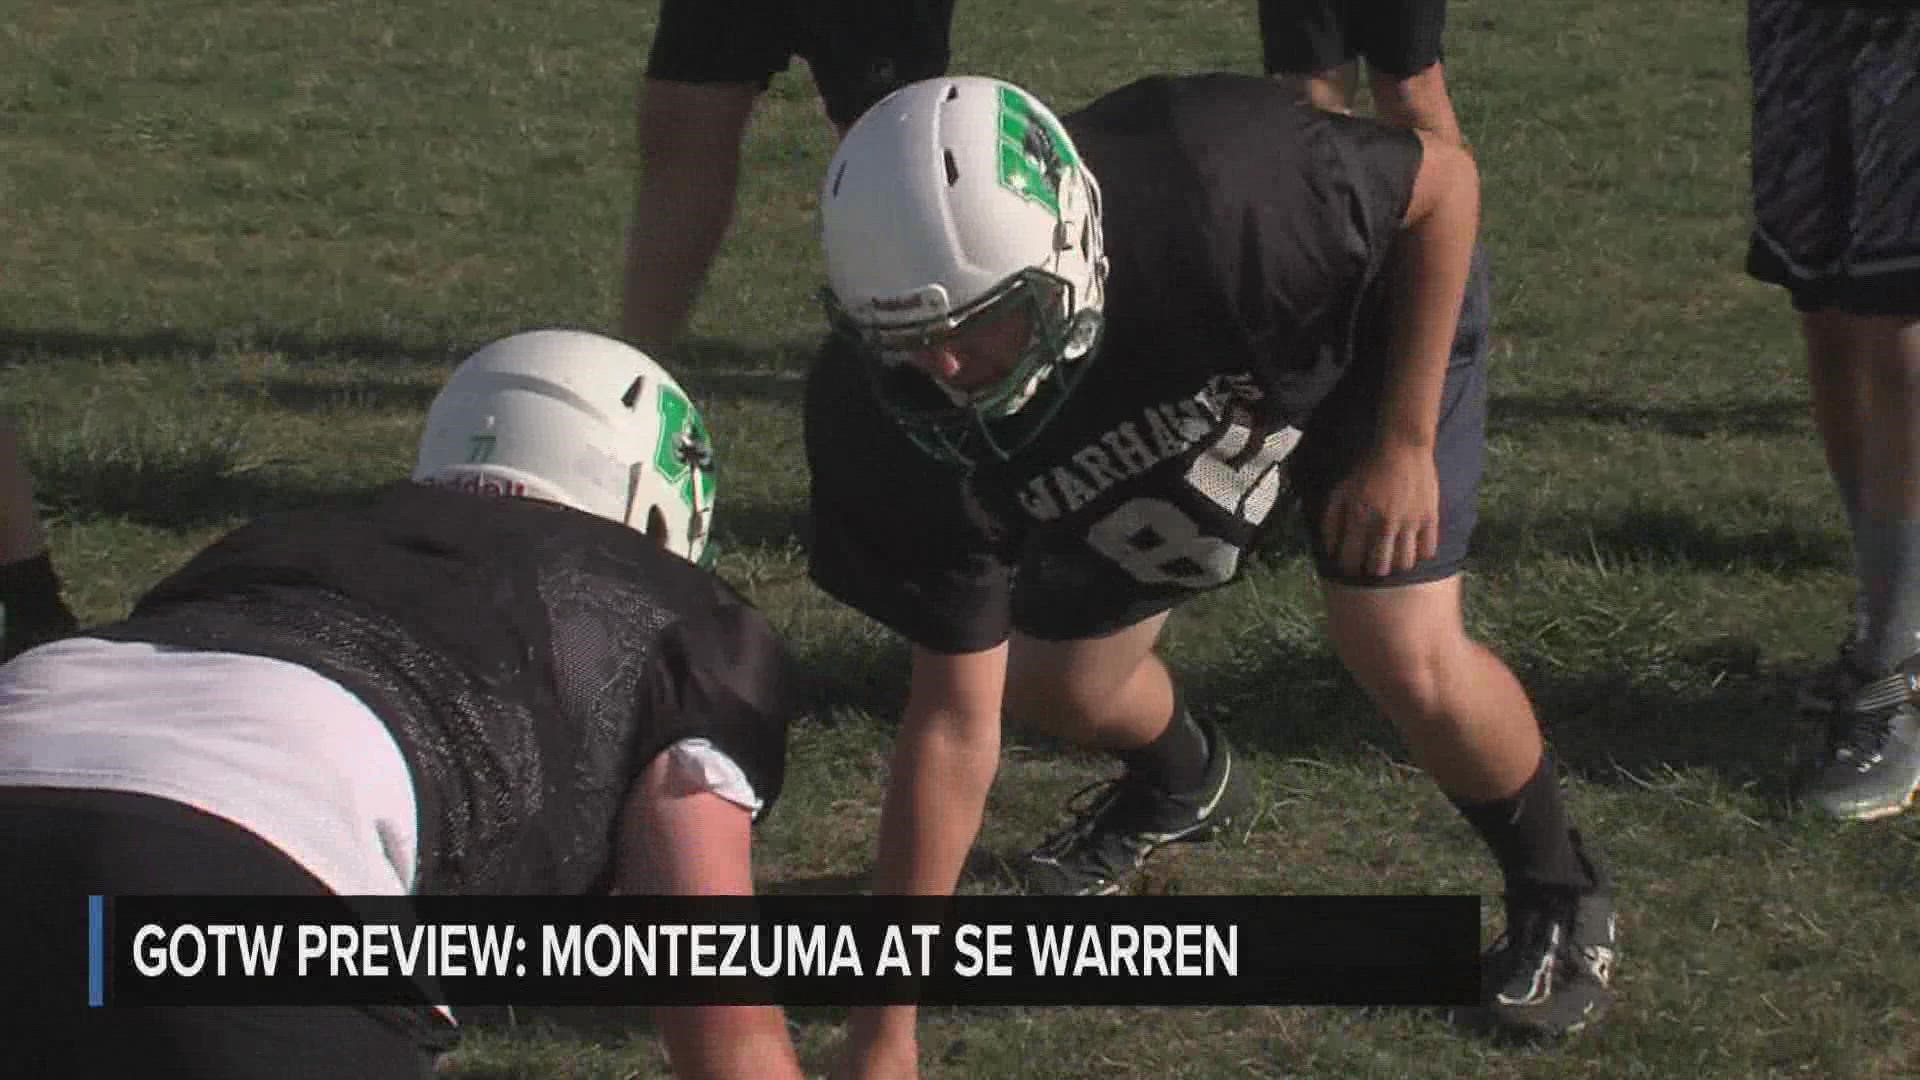 Montezuma brings a very balanced offense that can beat you through the air or on the ground. For Southeast Warren, their run game is their bread and butter.